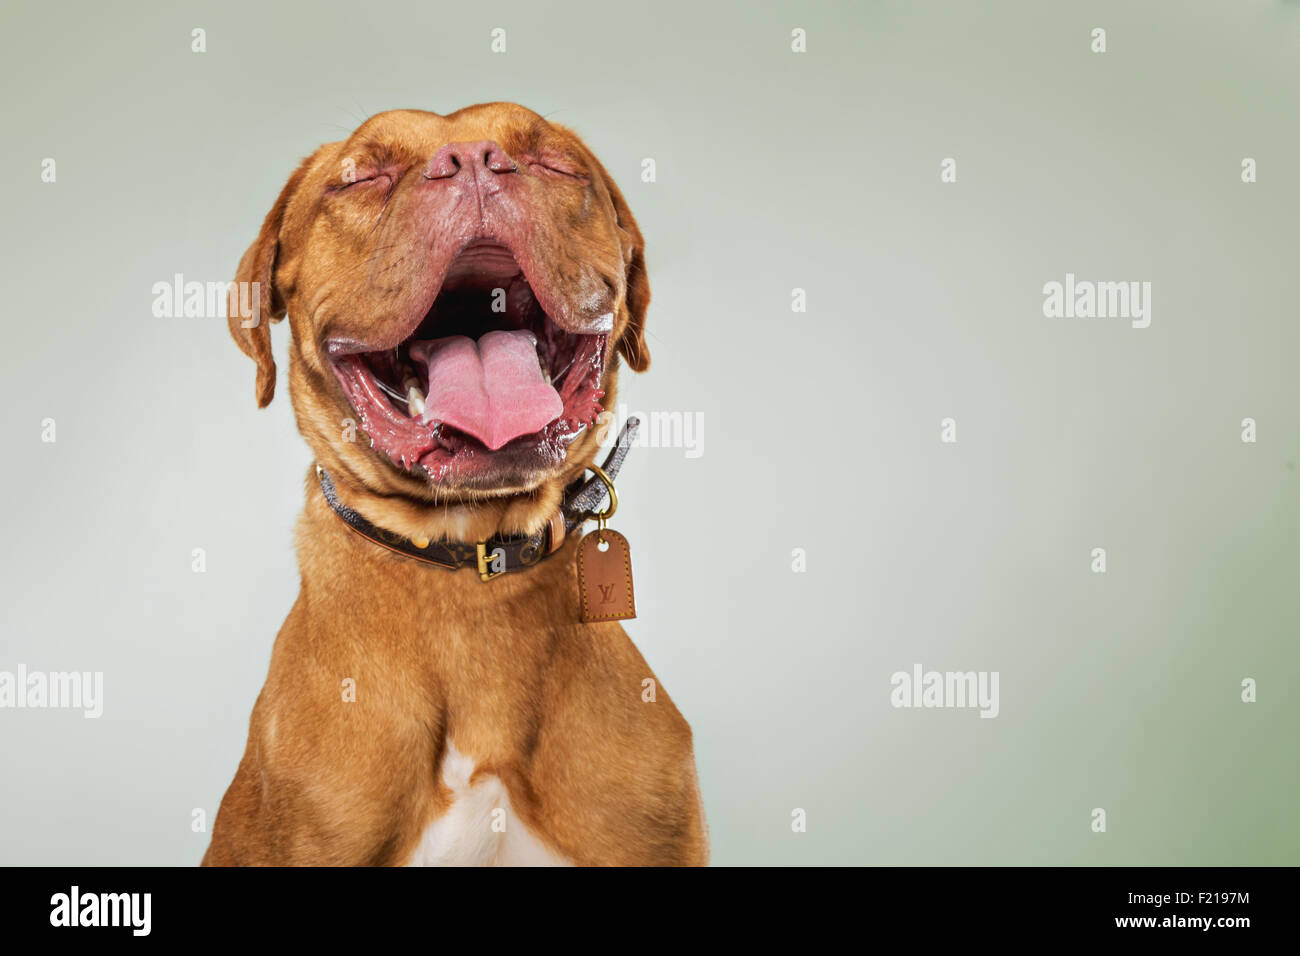 French mastiff in studio laughing and facing camera. Stock Photo